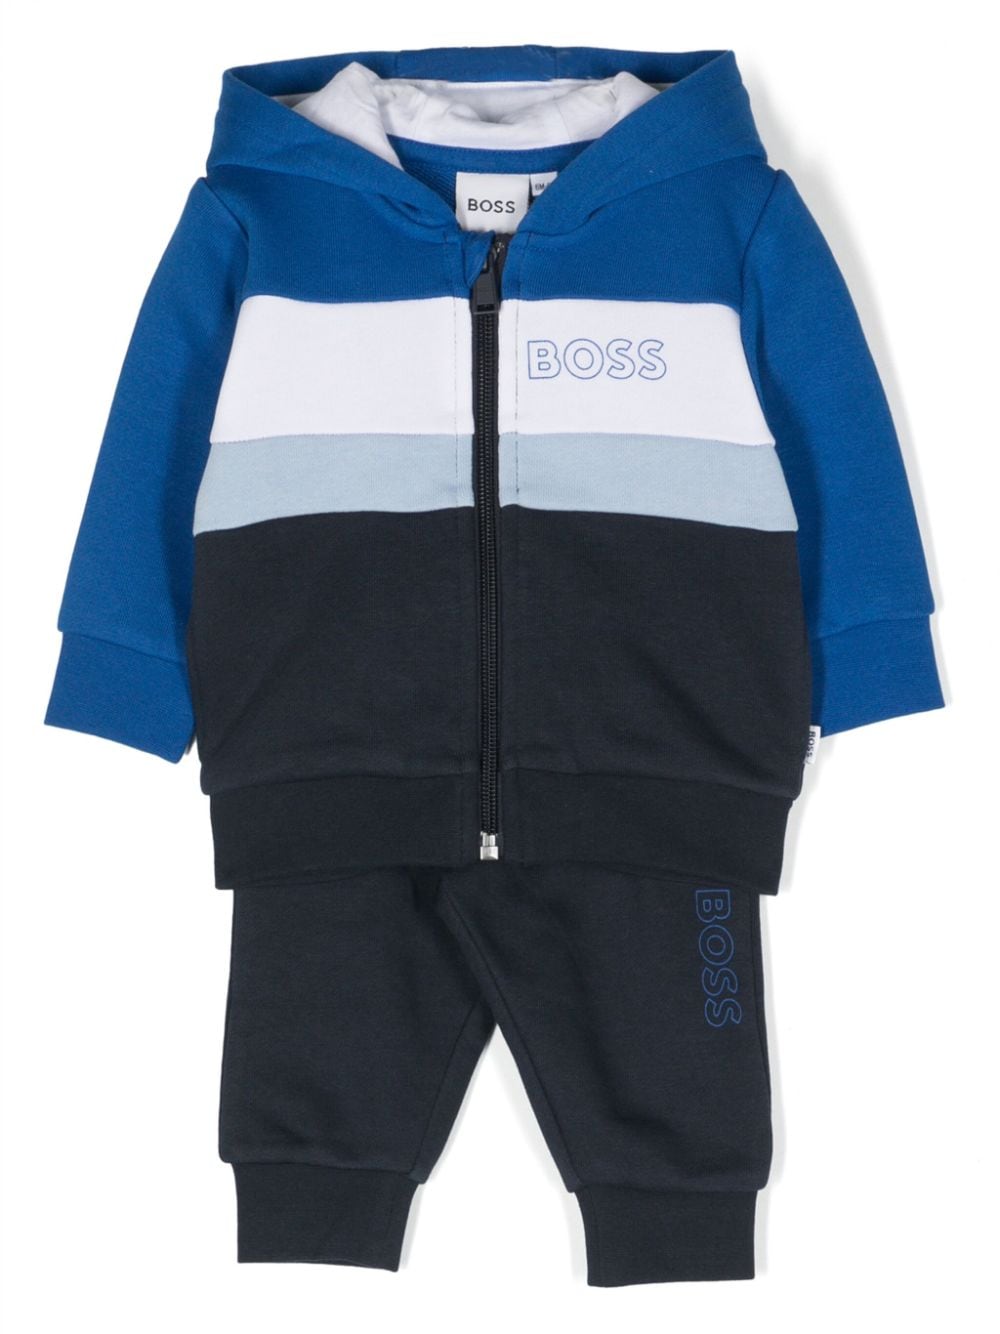 Blue sports outfit for newborns with logo